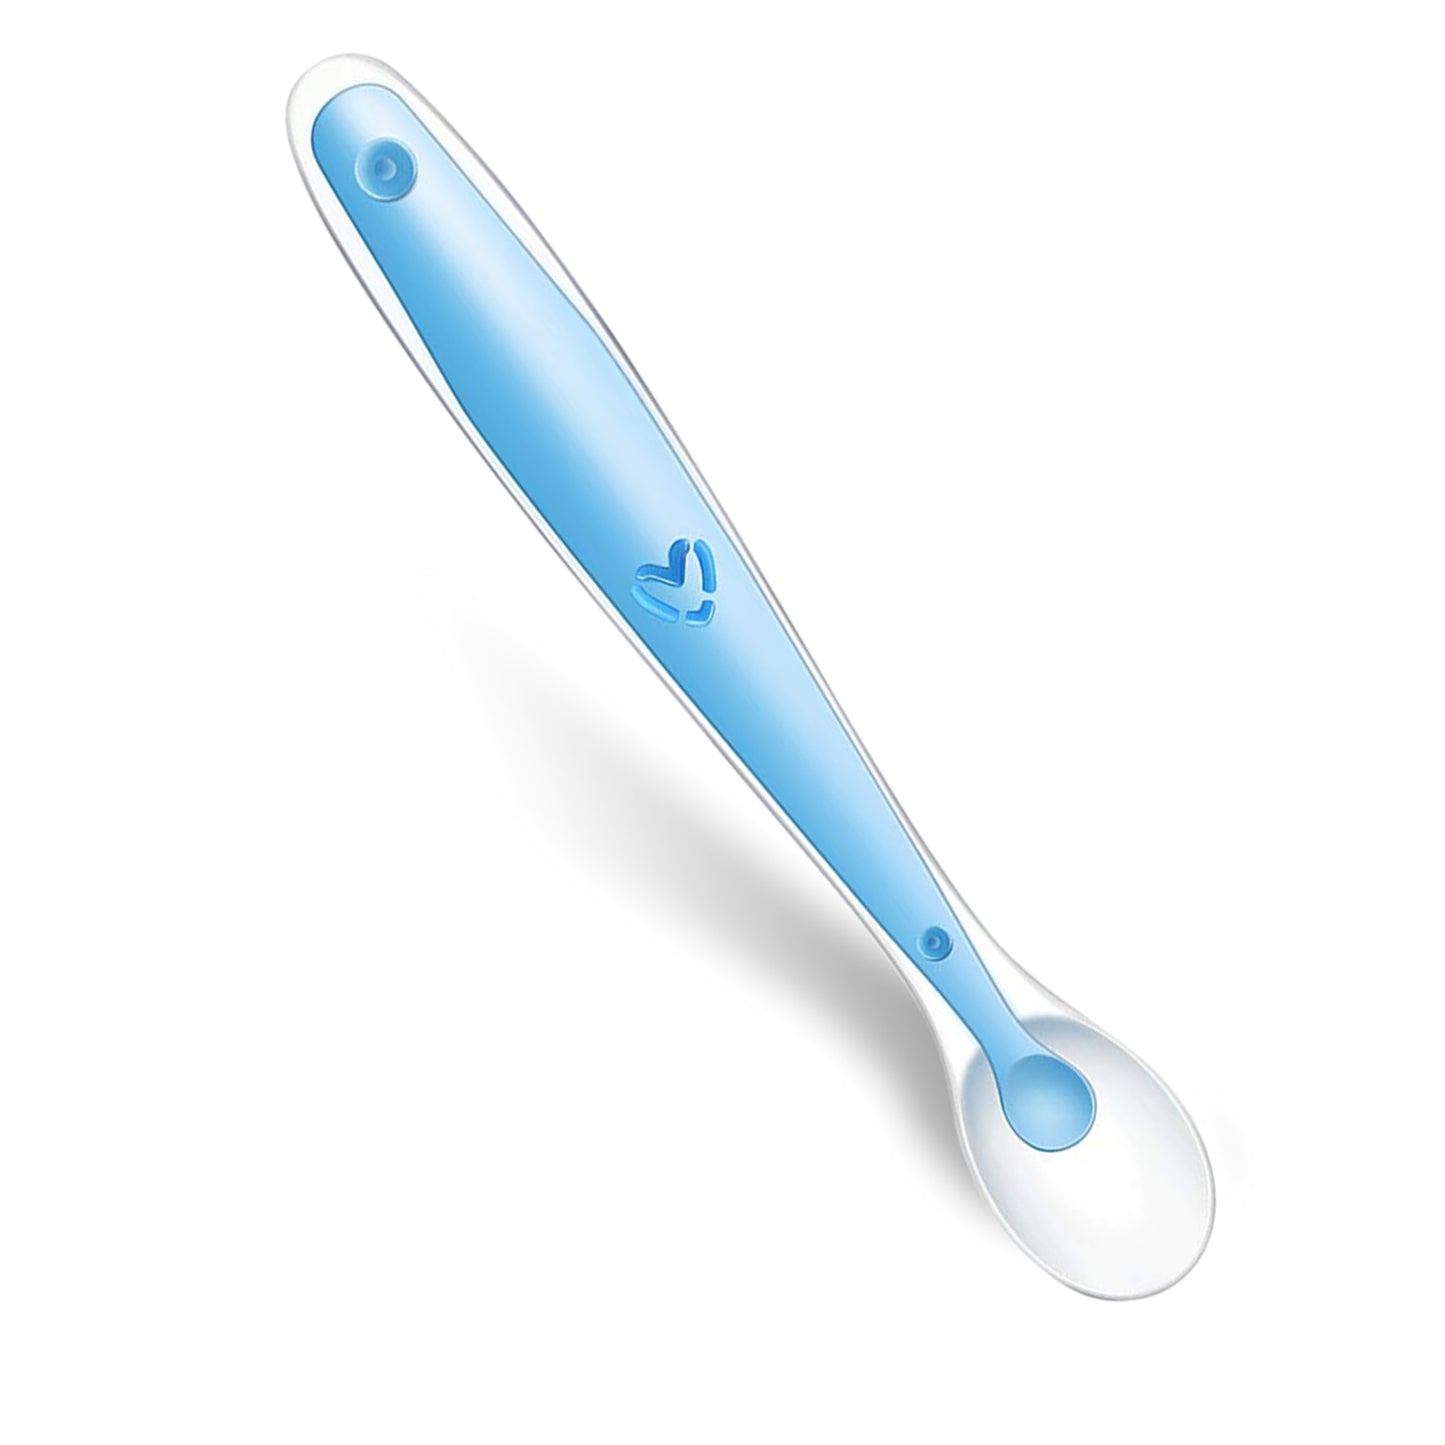 Baby Silicone Spoon